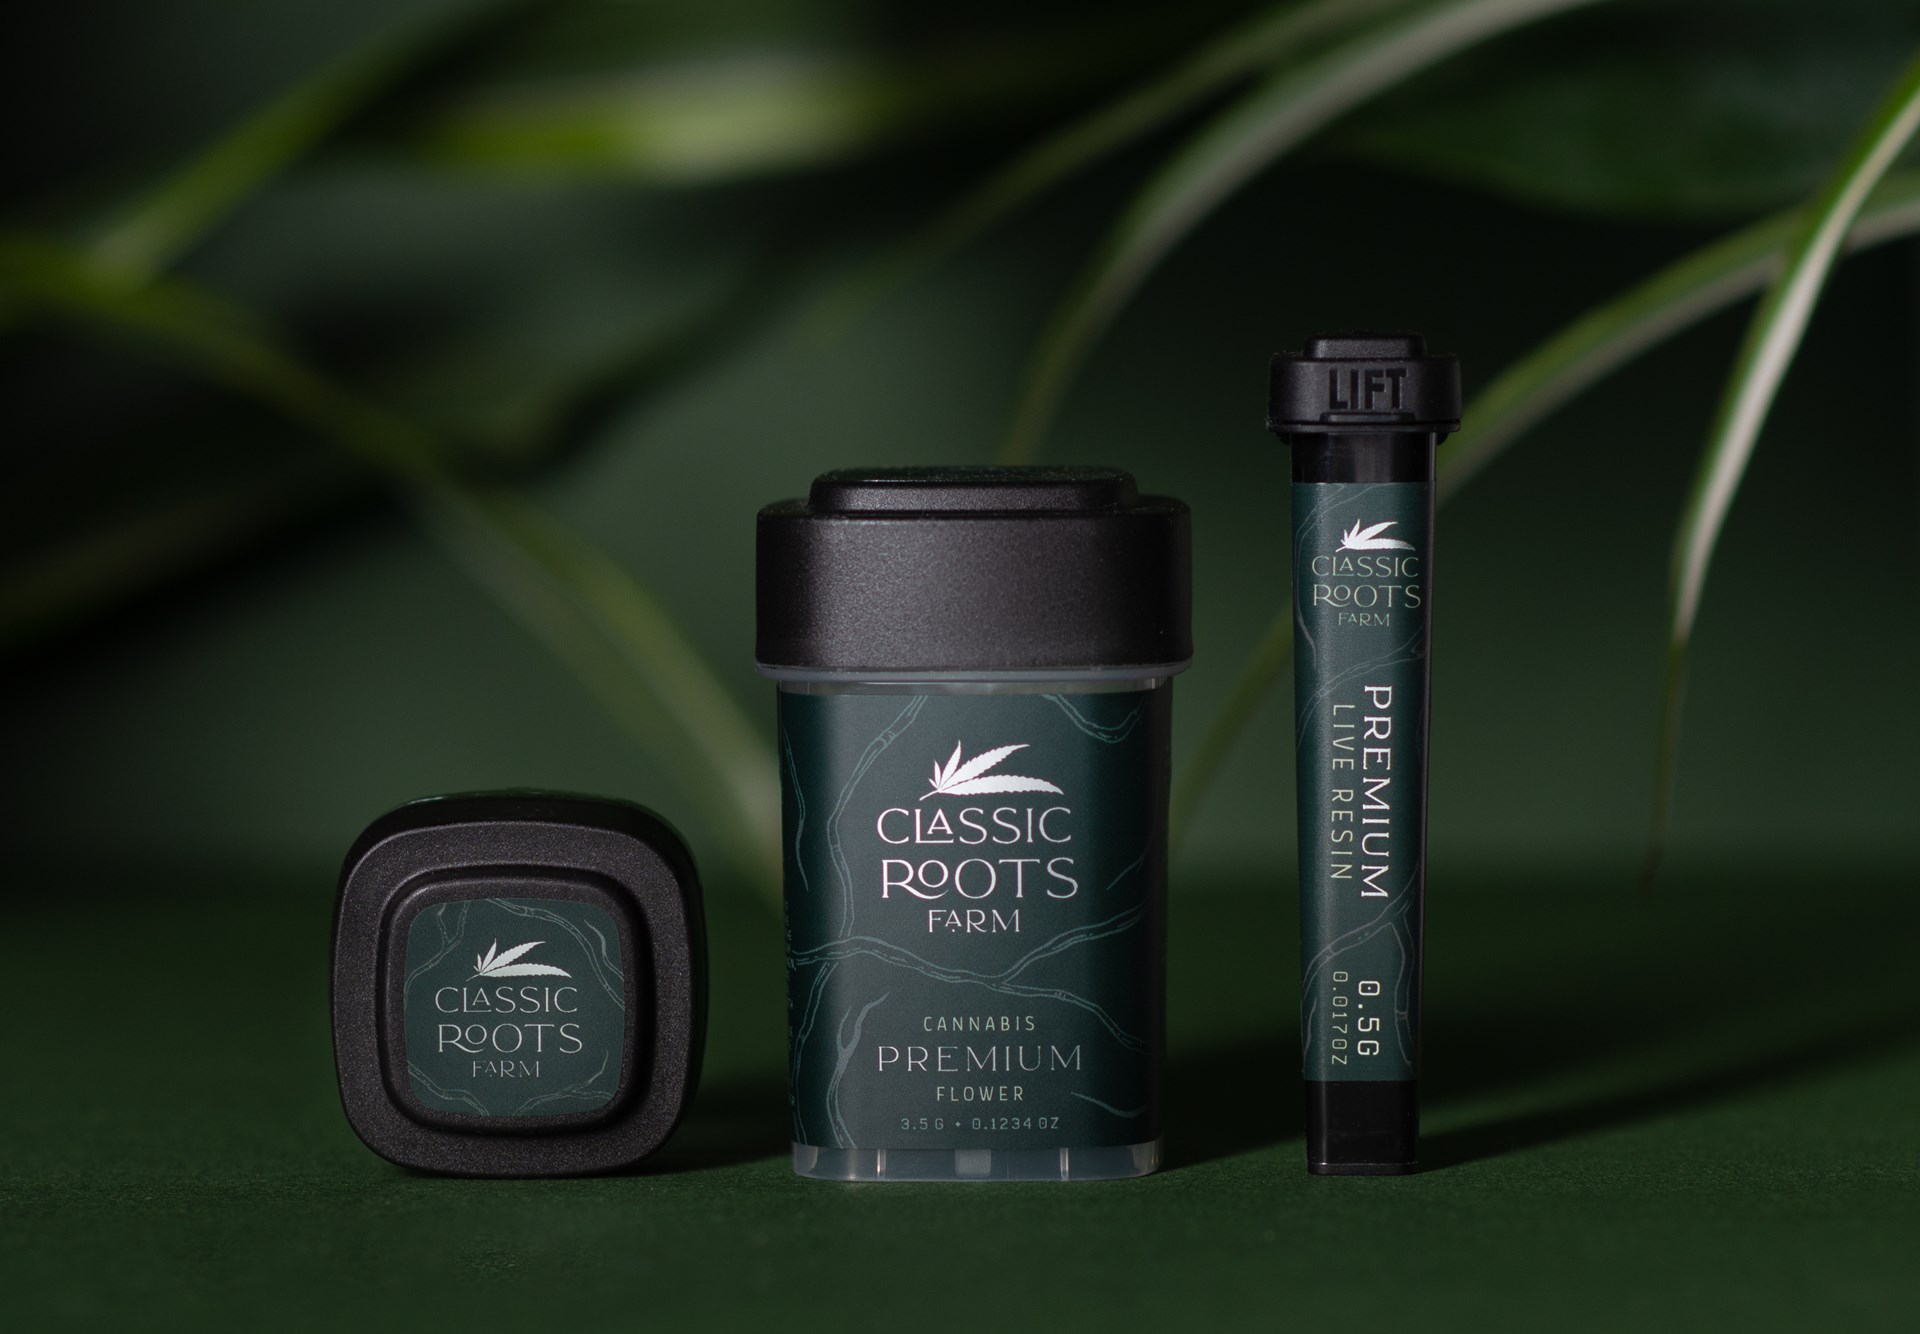 Calyx dram, concentrate container, and pre-roll tube with Classic Roots farm branding